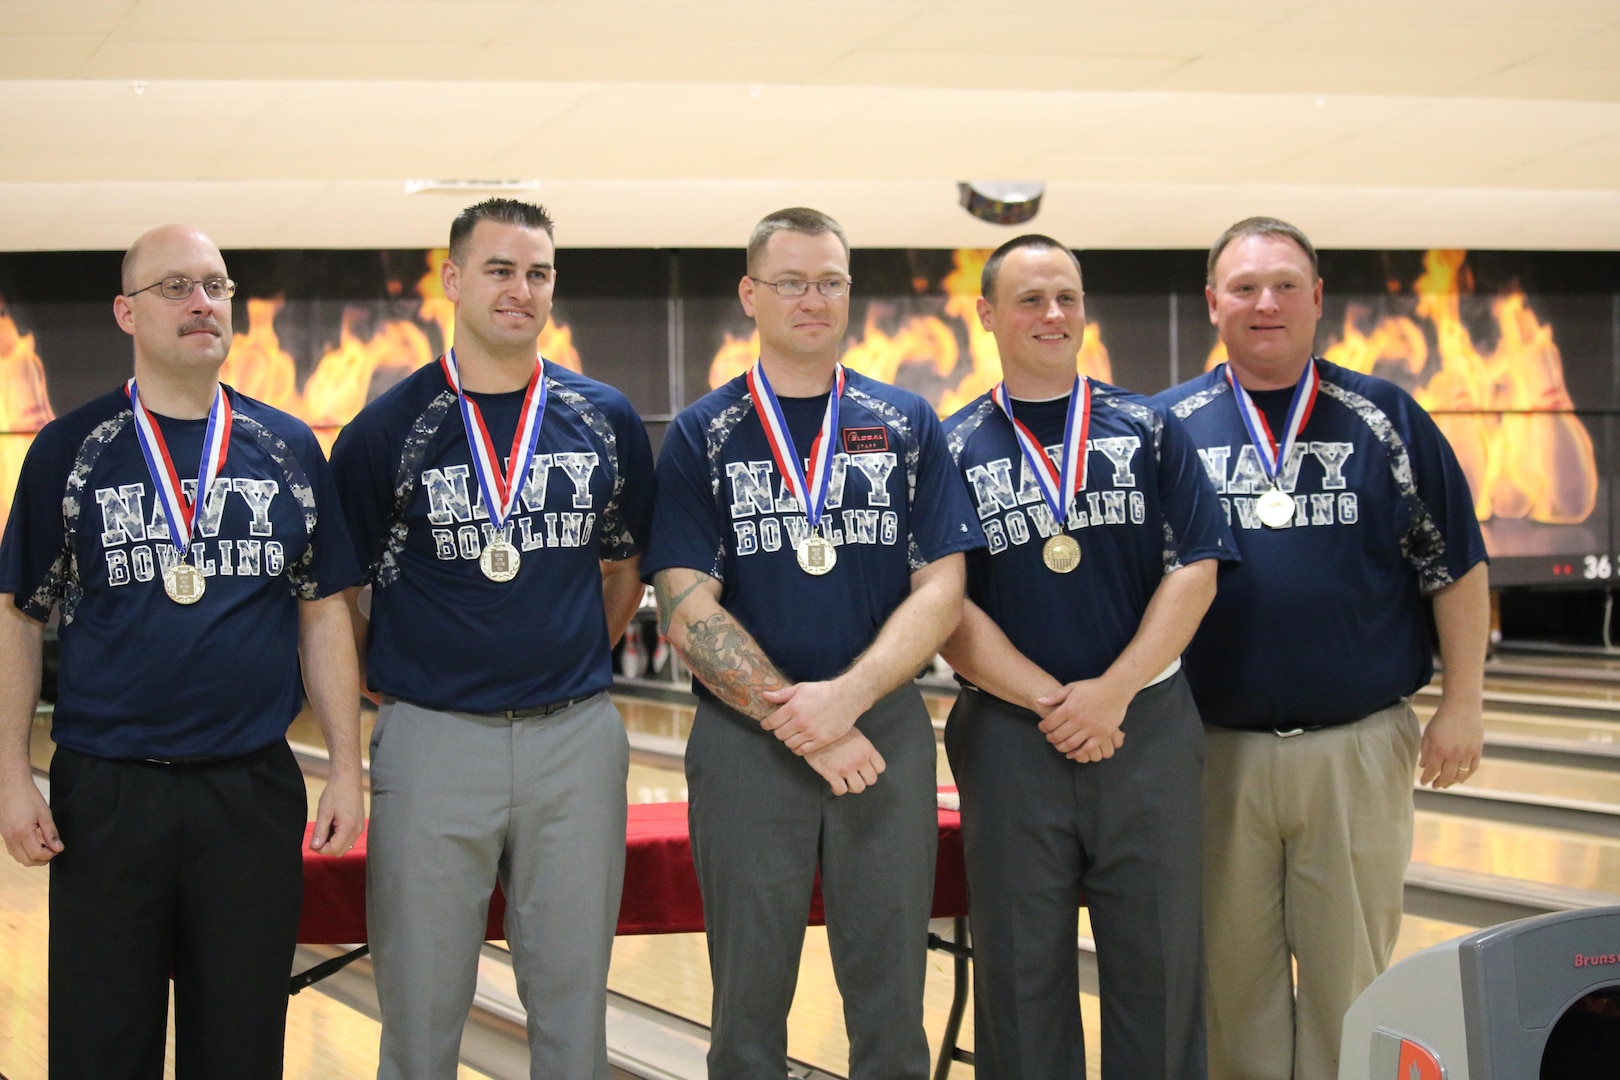 Navy Men win the 2017 Armed Forces Men's Team Title at the Armed Forces Bowling Championship hosted at Marine Corps Base Camp Pendleton, California from 5-8 May at the Leatherneck Lanes. Pictured: Petty Officer 1st Class Guy Cruise, Norfolk, Vir.; Coast Guard LTJG Scott McIntire, USCG Honor Guard, DC; Petty Officer 2nd Class Zachary Torrosian, Lemoore, Calif.; Petty Officer 1st Class Michael Zylius, USS Mason